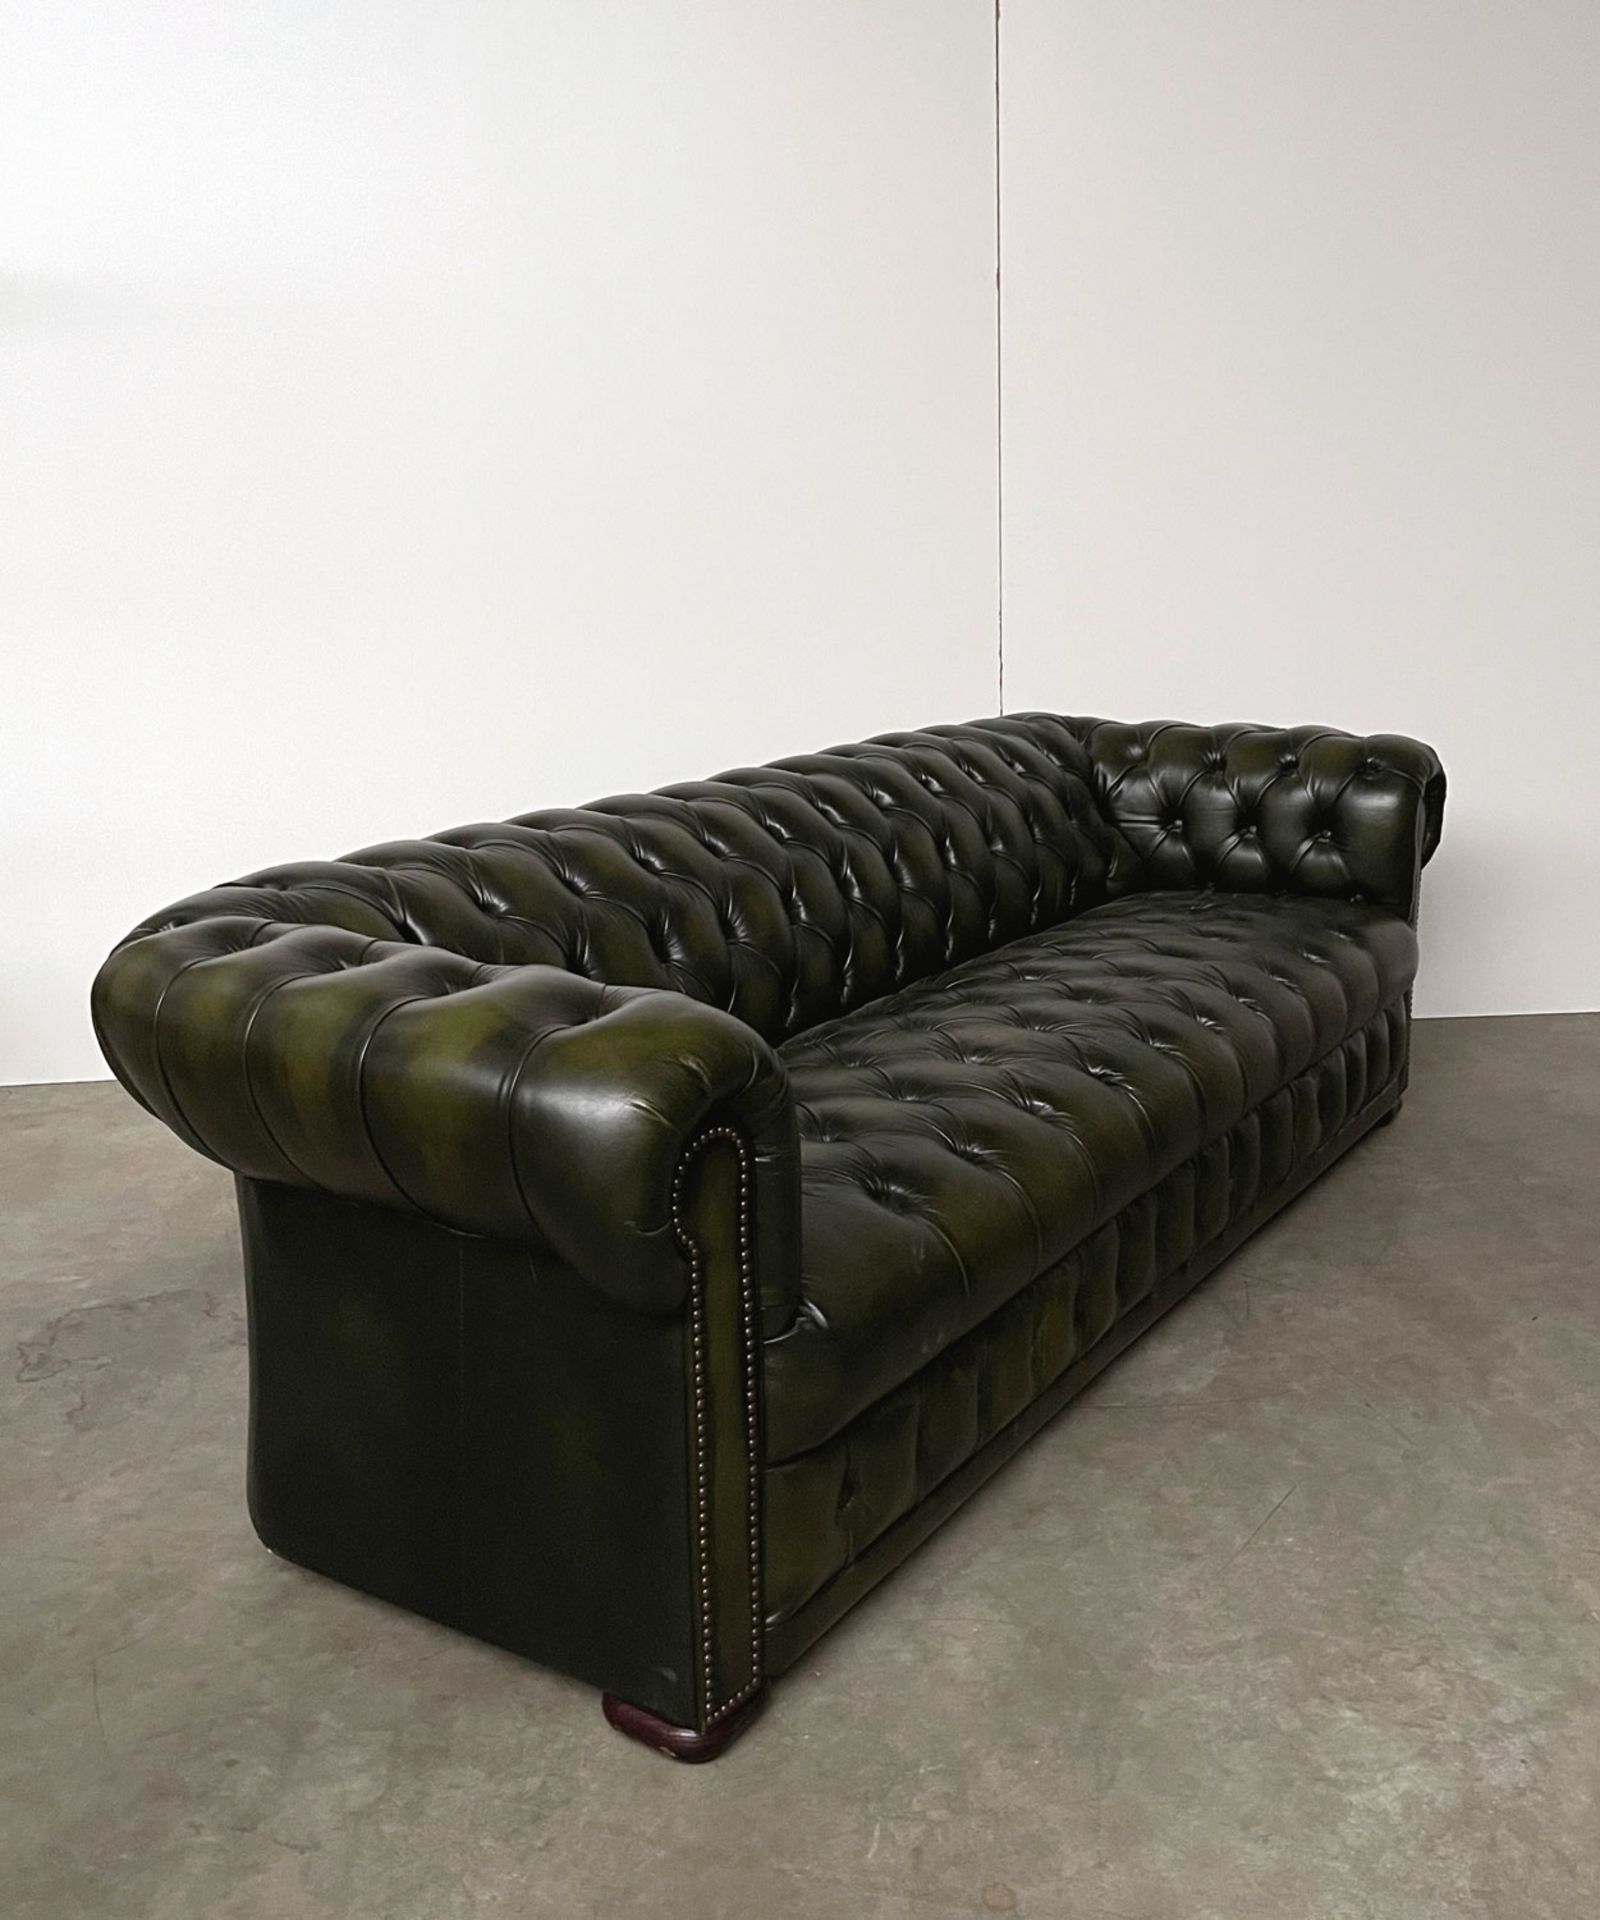 Green Leather Chesterfield Sofa - Image 2 of 10